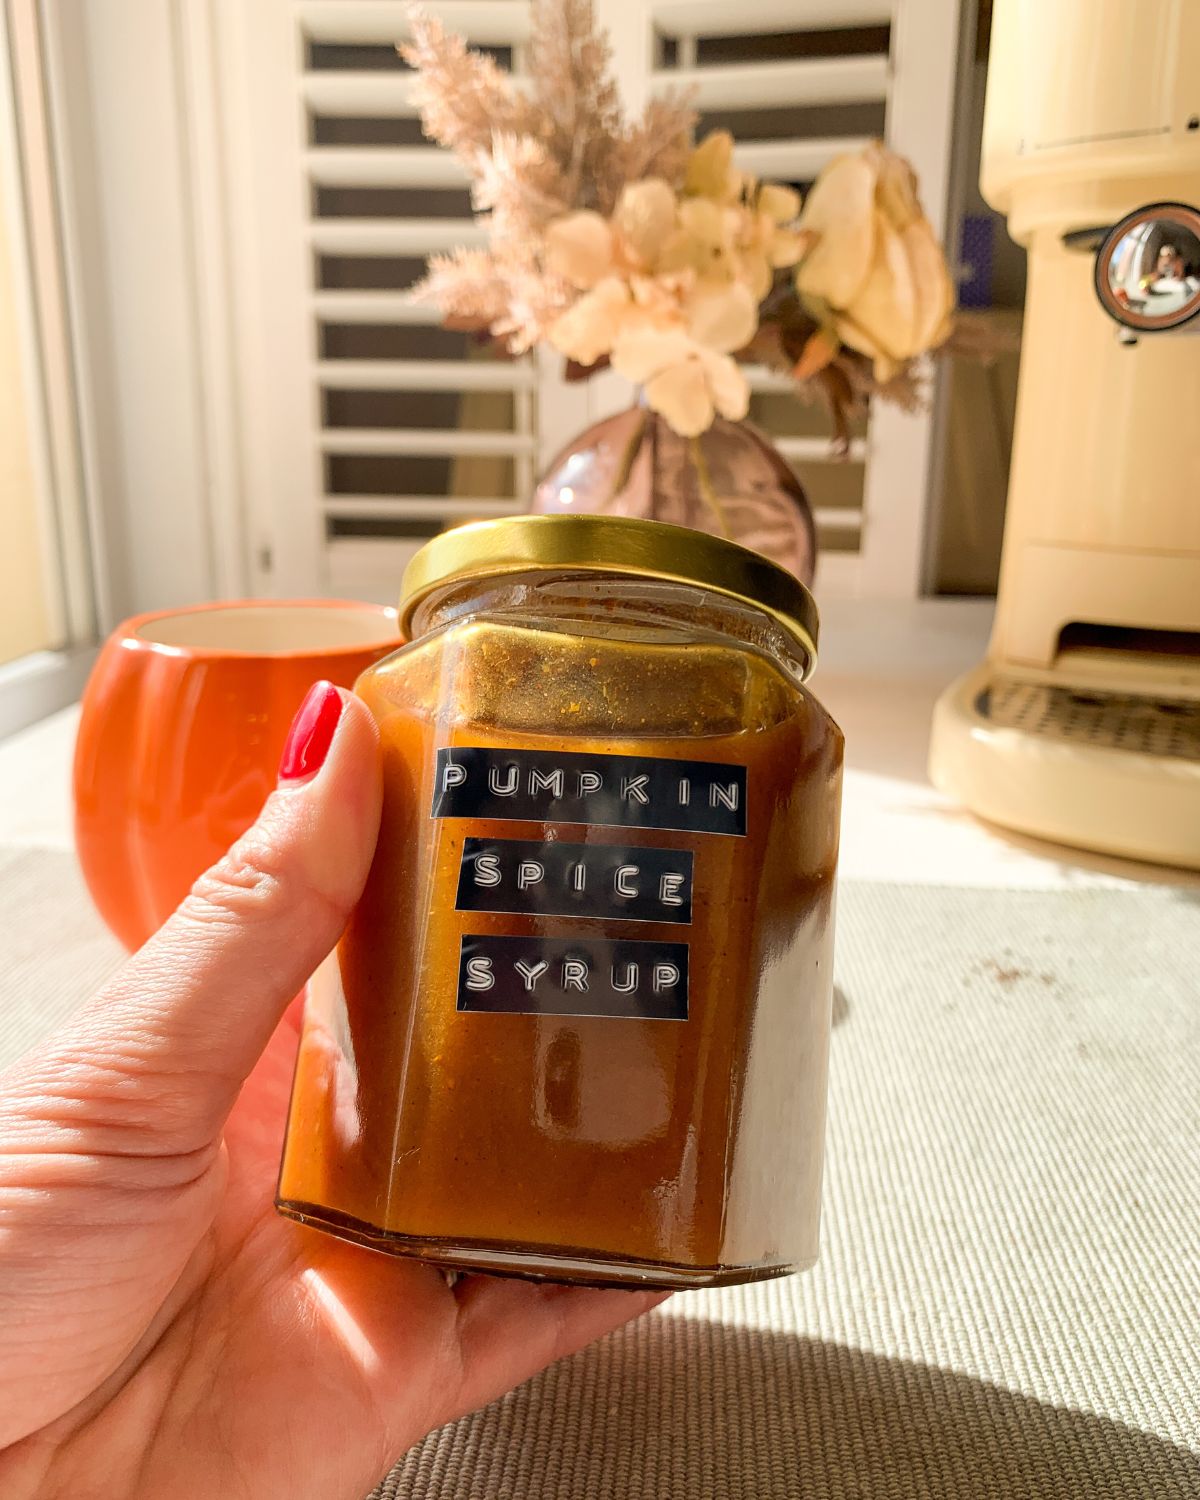 Pumpkin spice syrup in a jar with flowers and a coffee machine in the background.